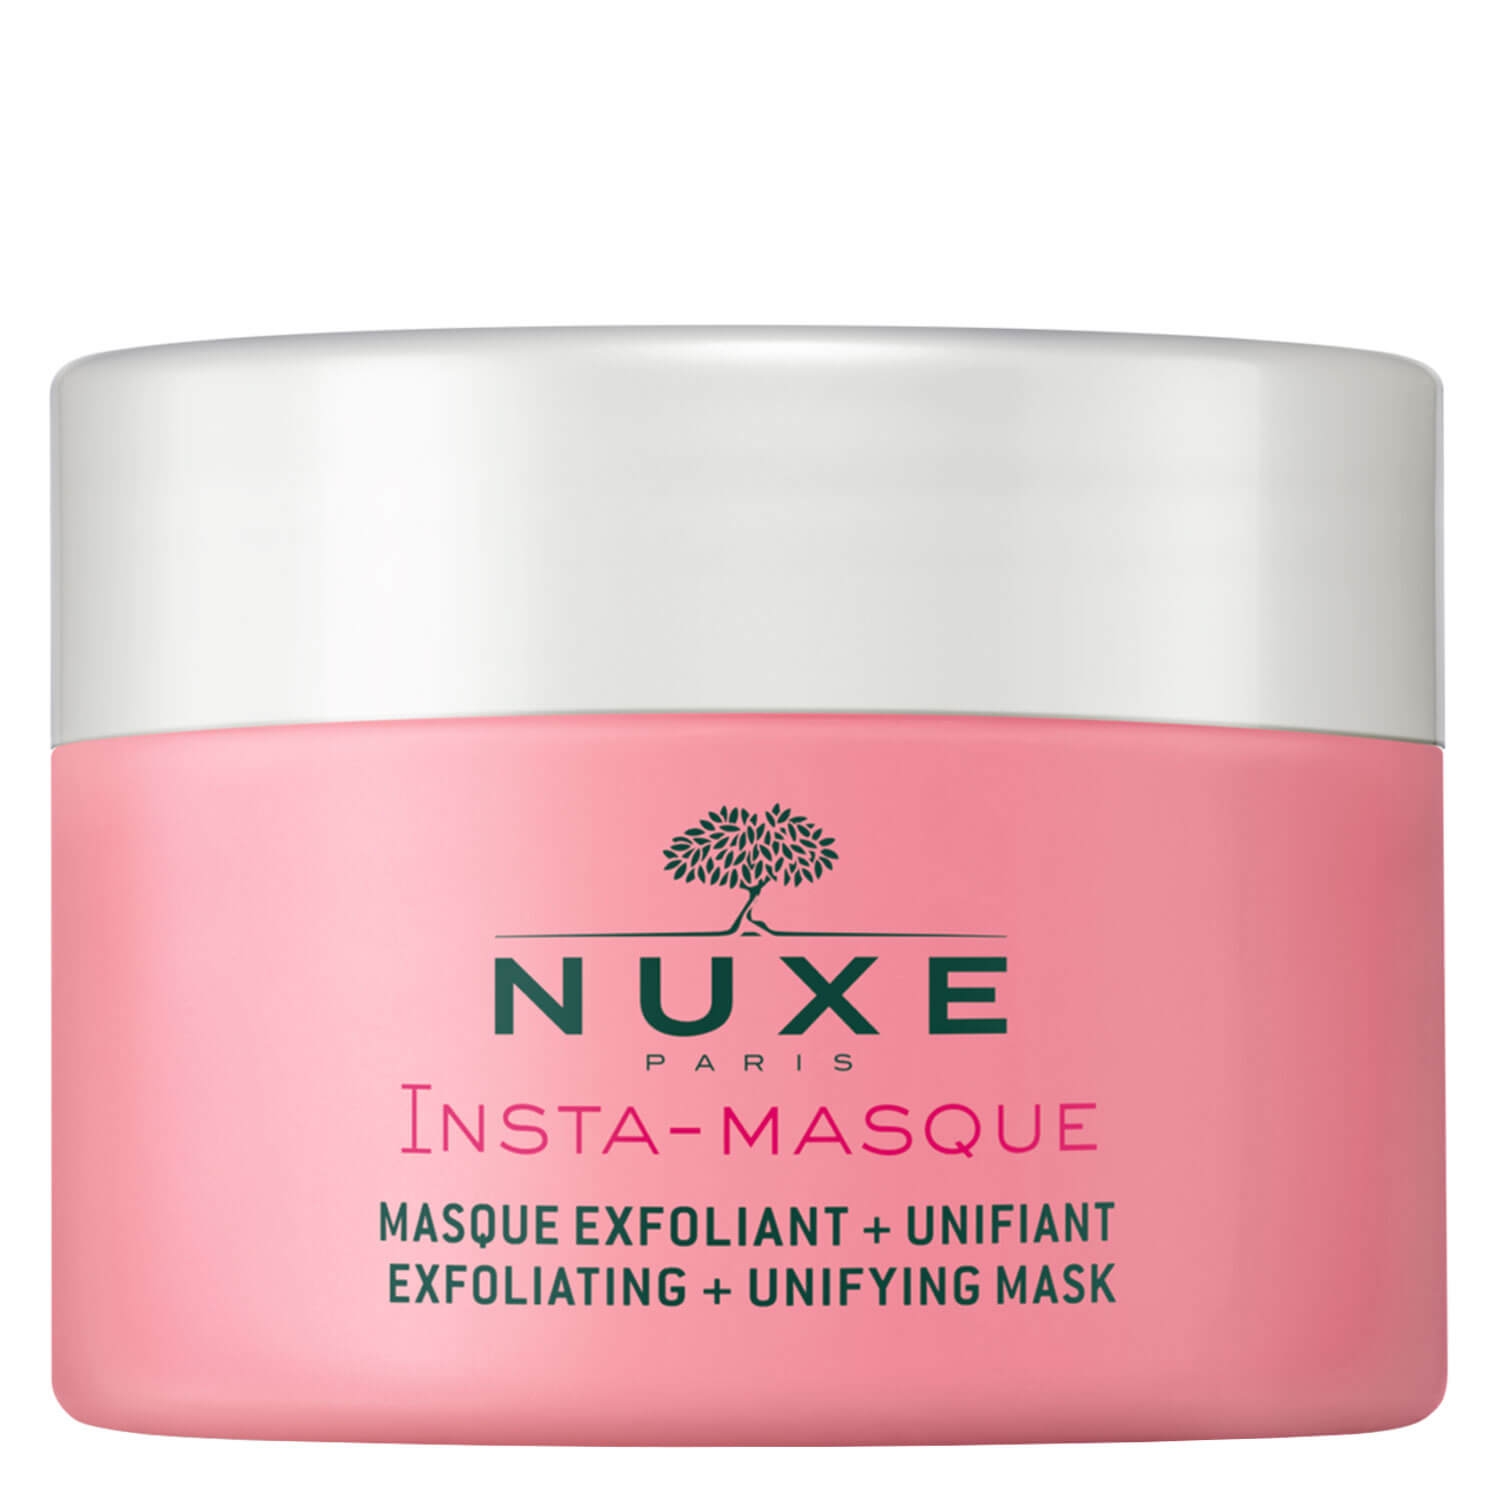 Product image from Insta-Masque - Masque Exfoliant+Unifiant